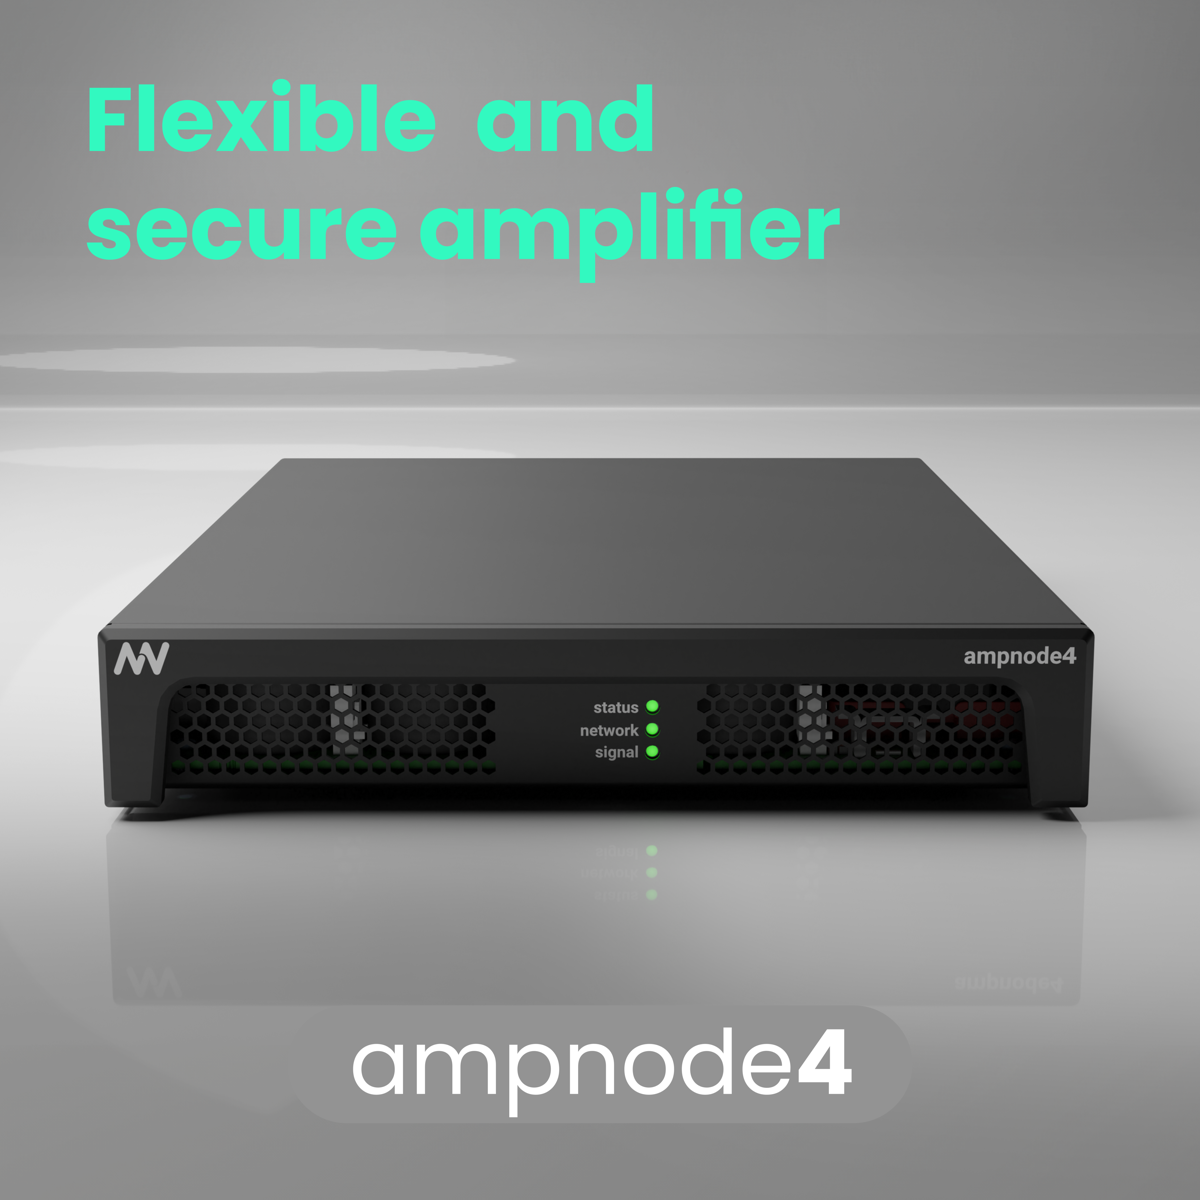  The ampnode4 is presented as a flexible and secure amplifier. 